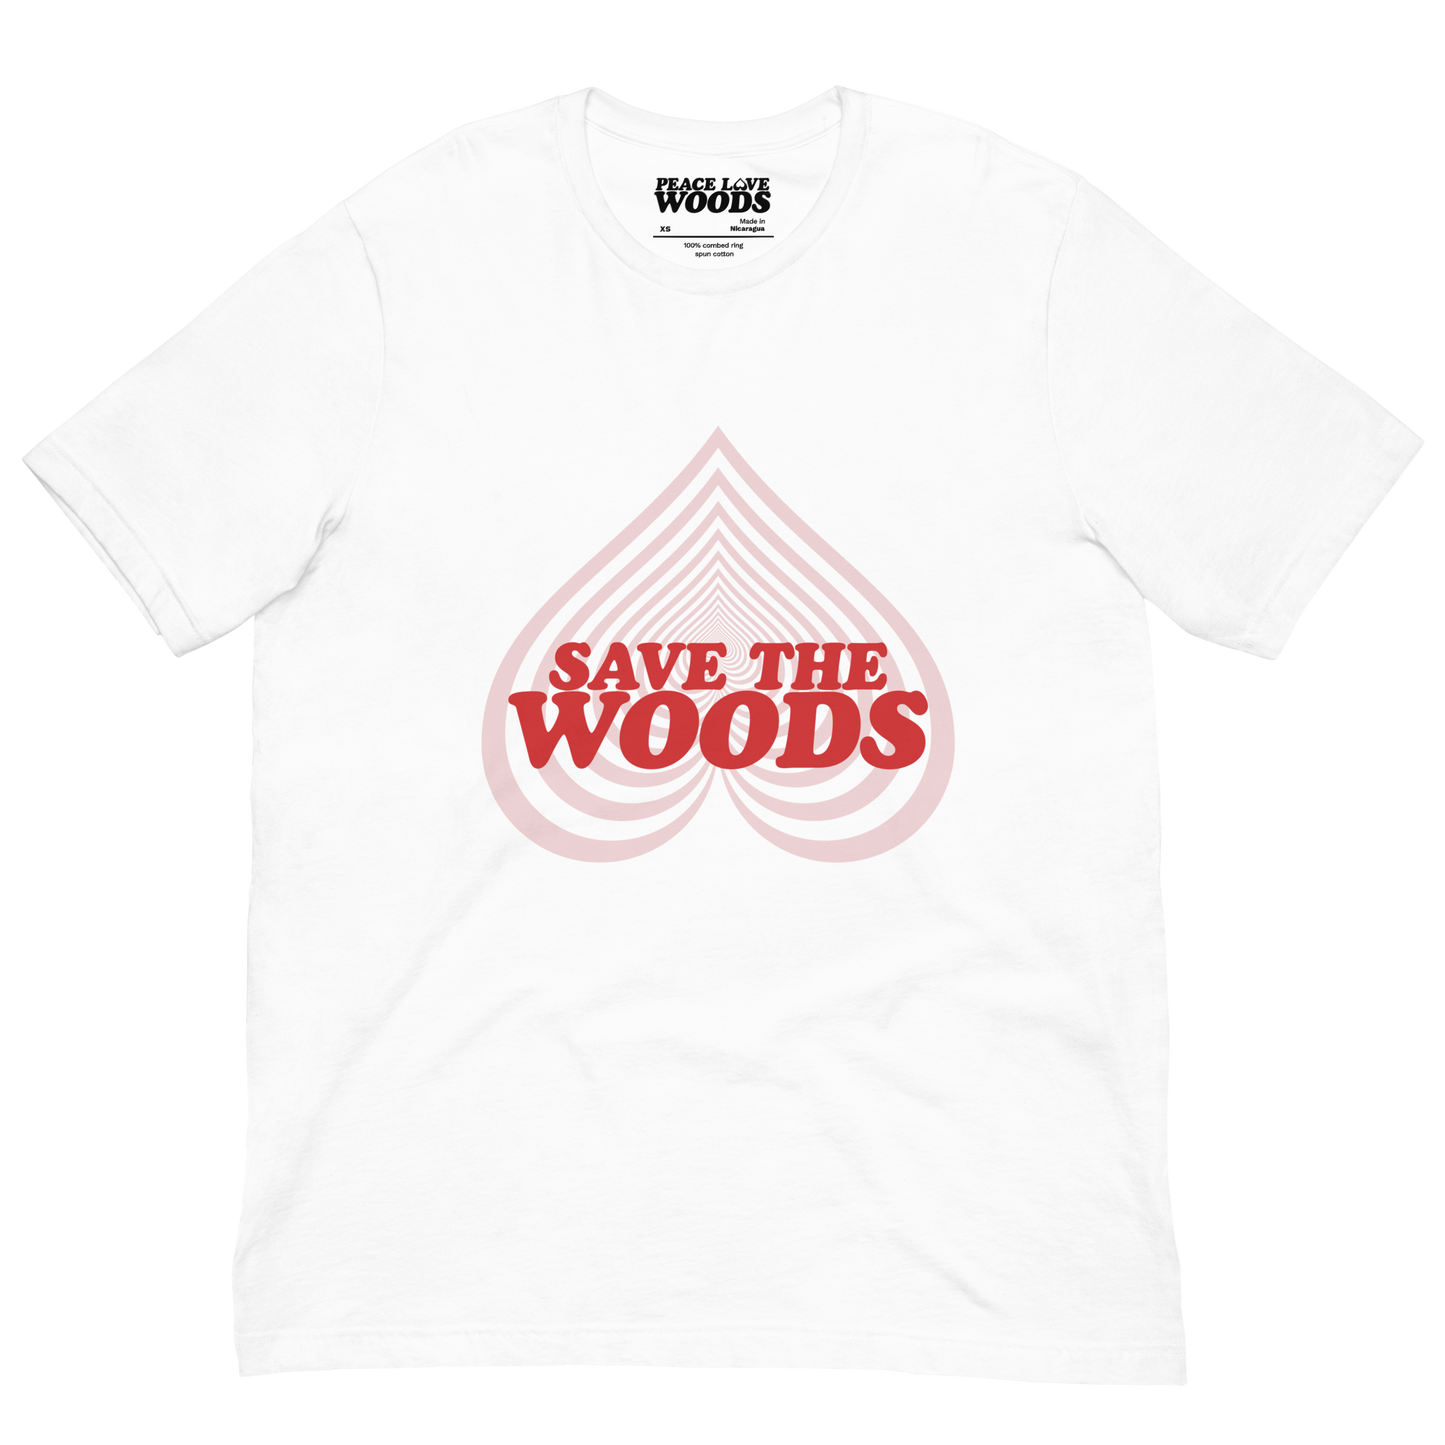 SAVE THE WOODS - white t